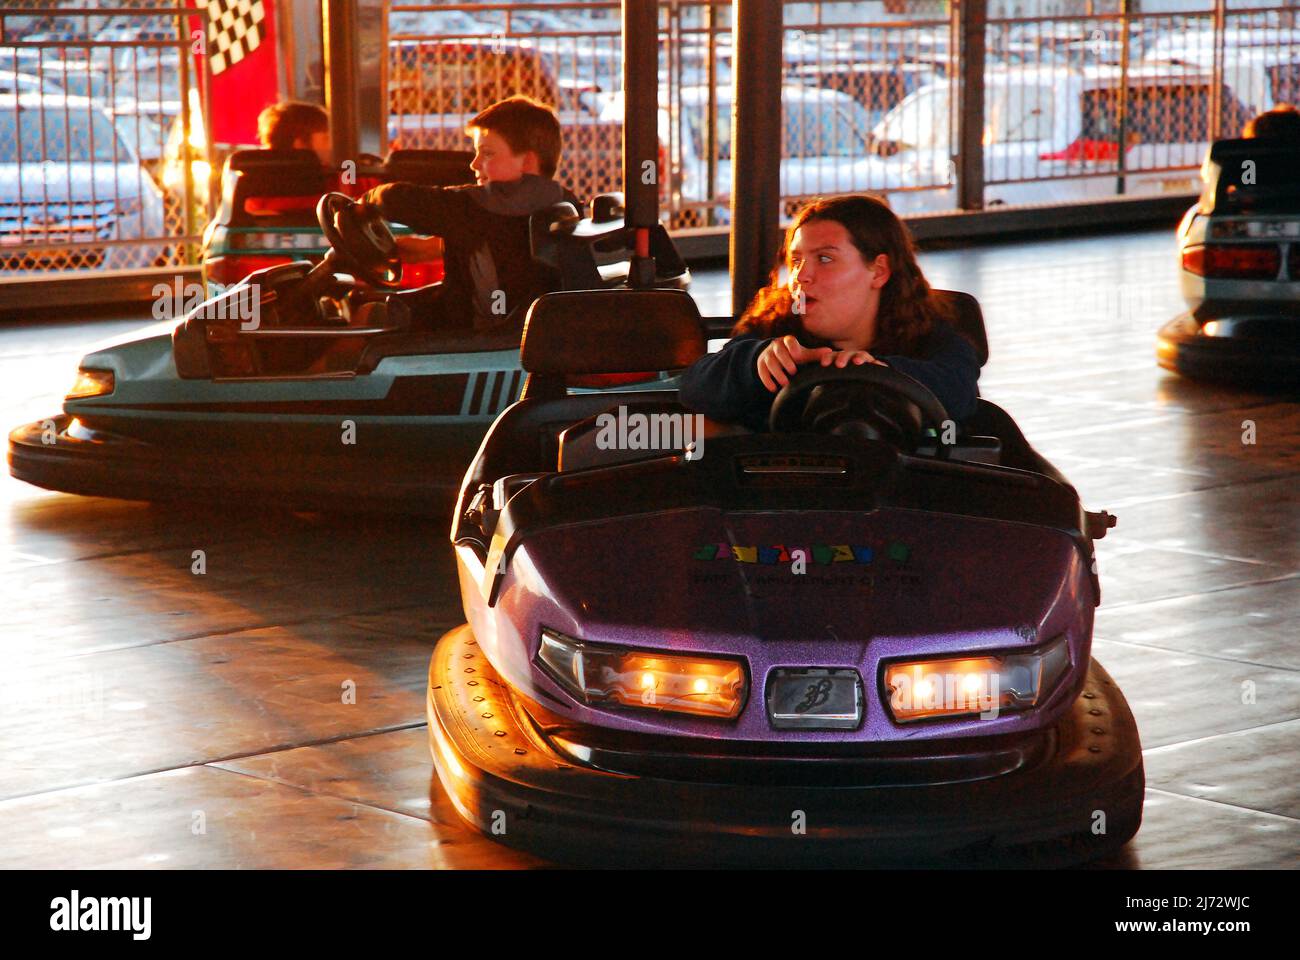 A young girl enjoys a turn on the bumper cars at an amusement park Stock Photo